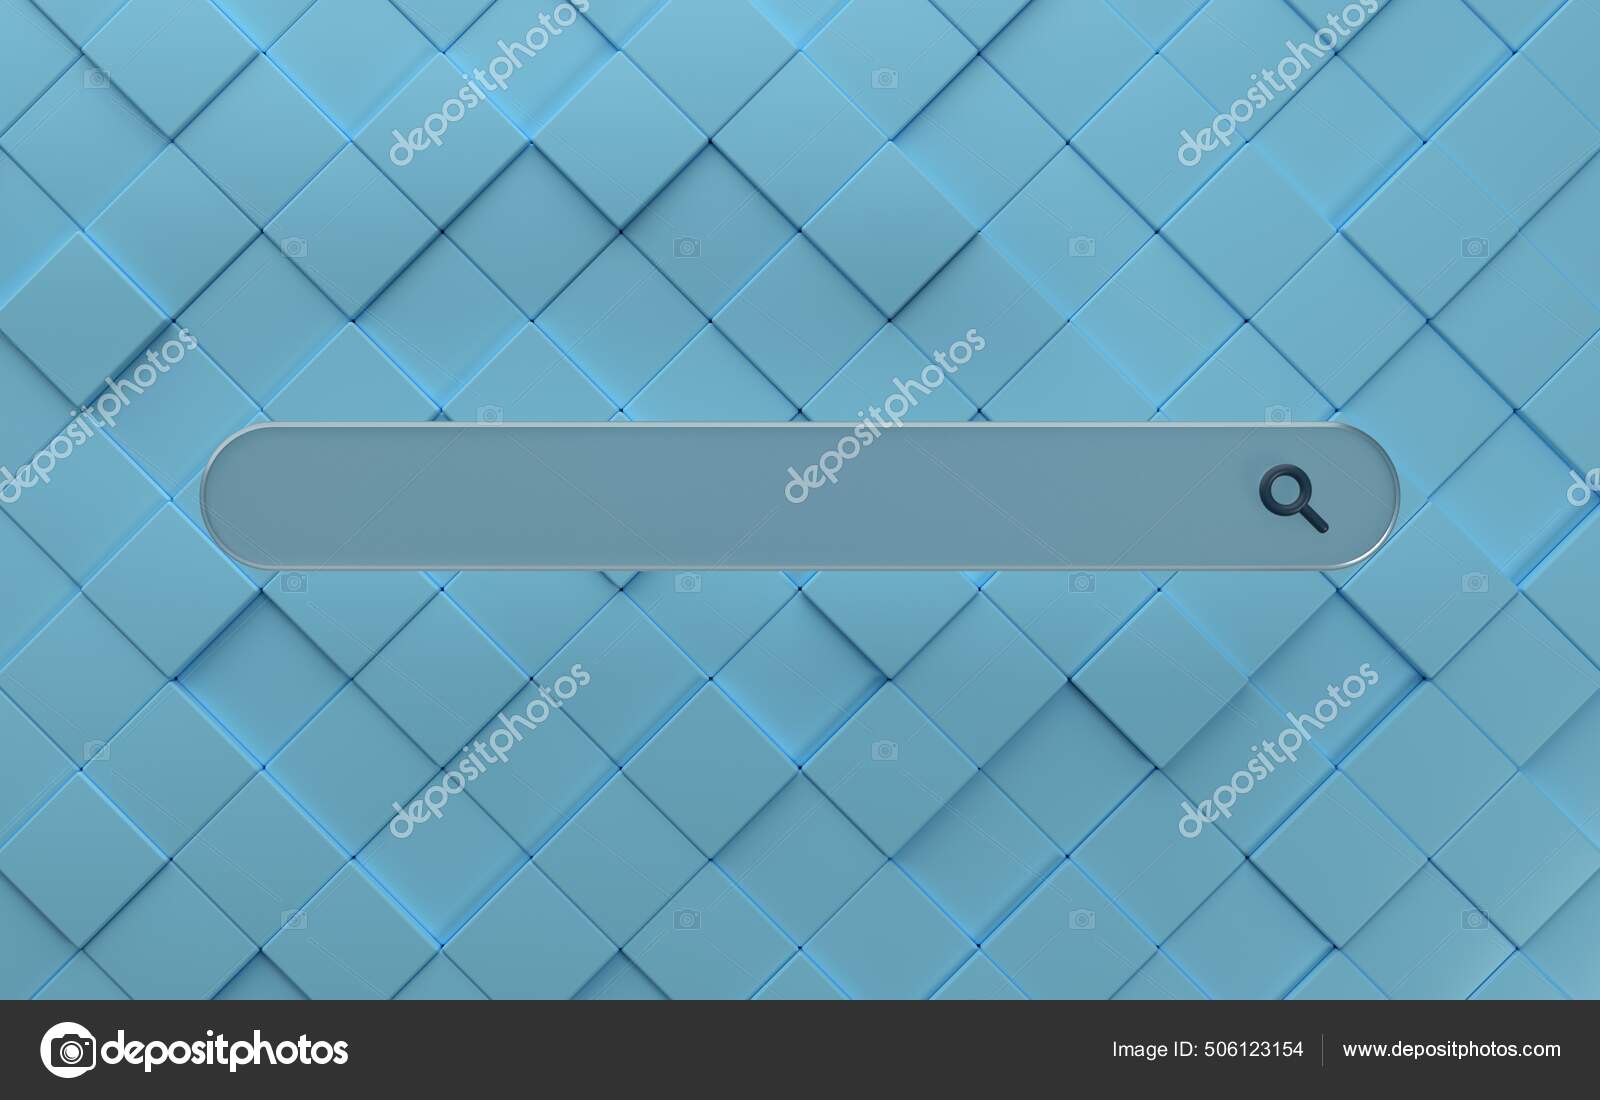 Search Bar Modern Background Stock Photo by © 506123154